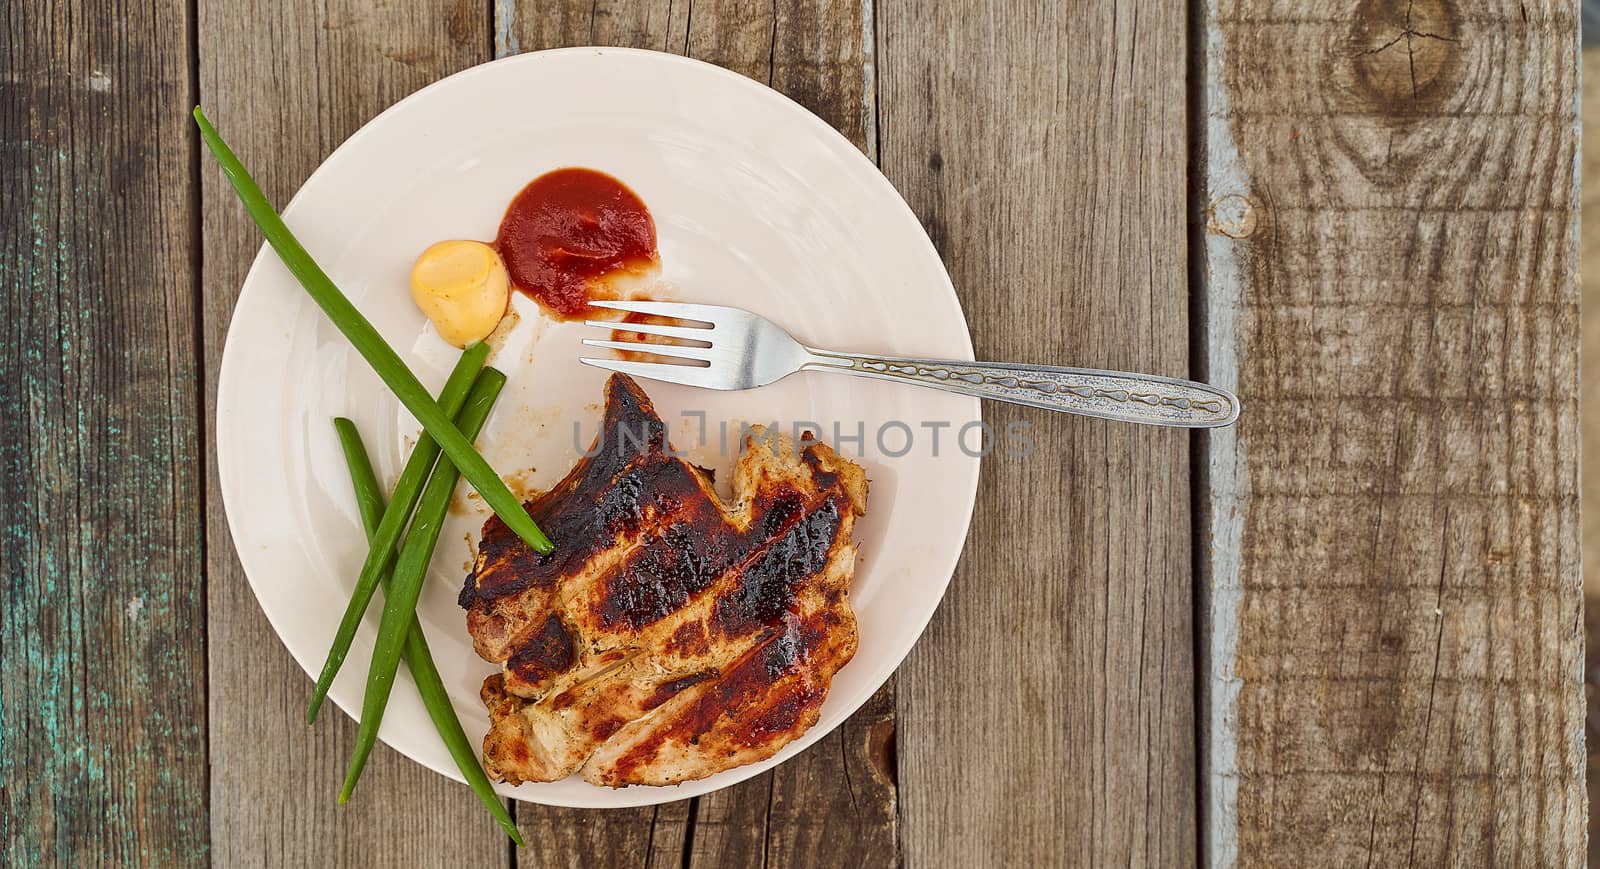 Ready pork steak in a white plate with green onions on an old wooden table. High quality photo